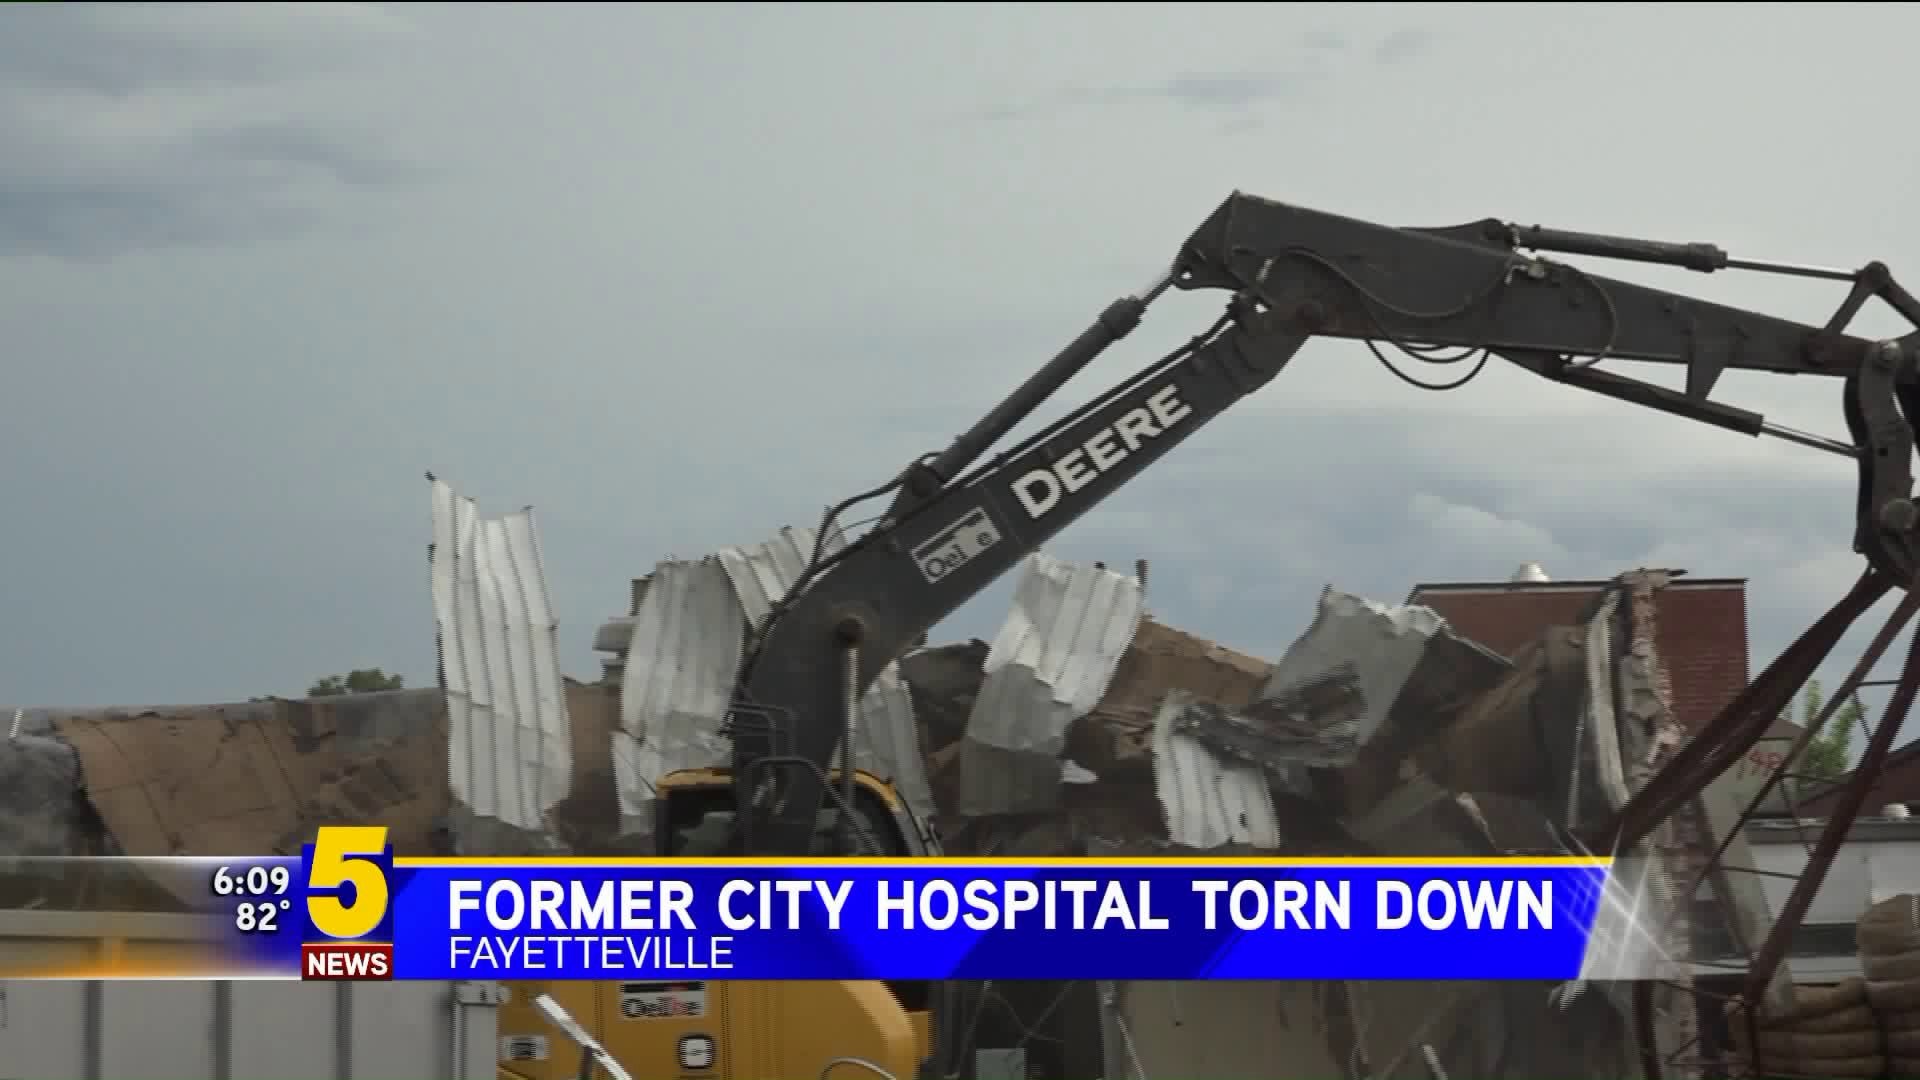 Formere City Hospital Torn Down